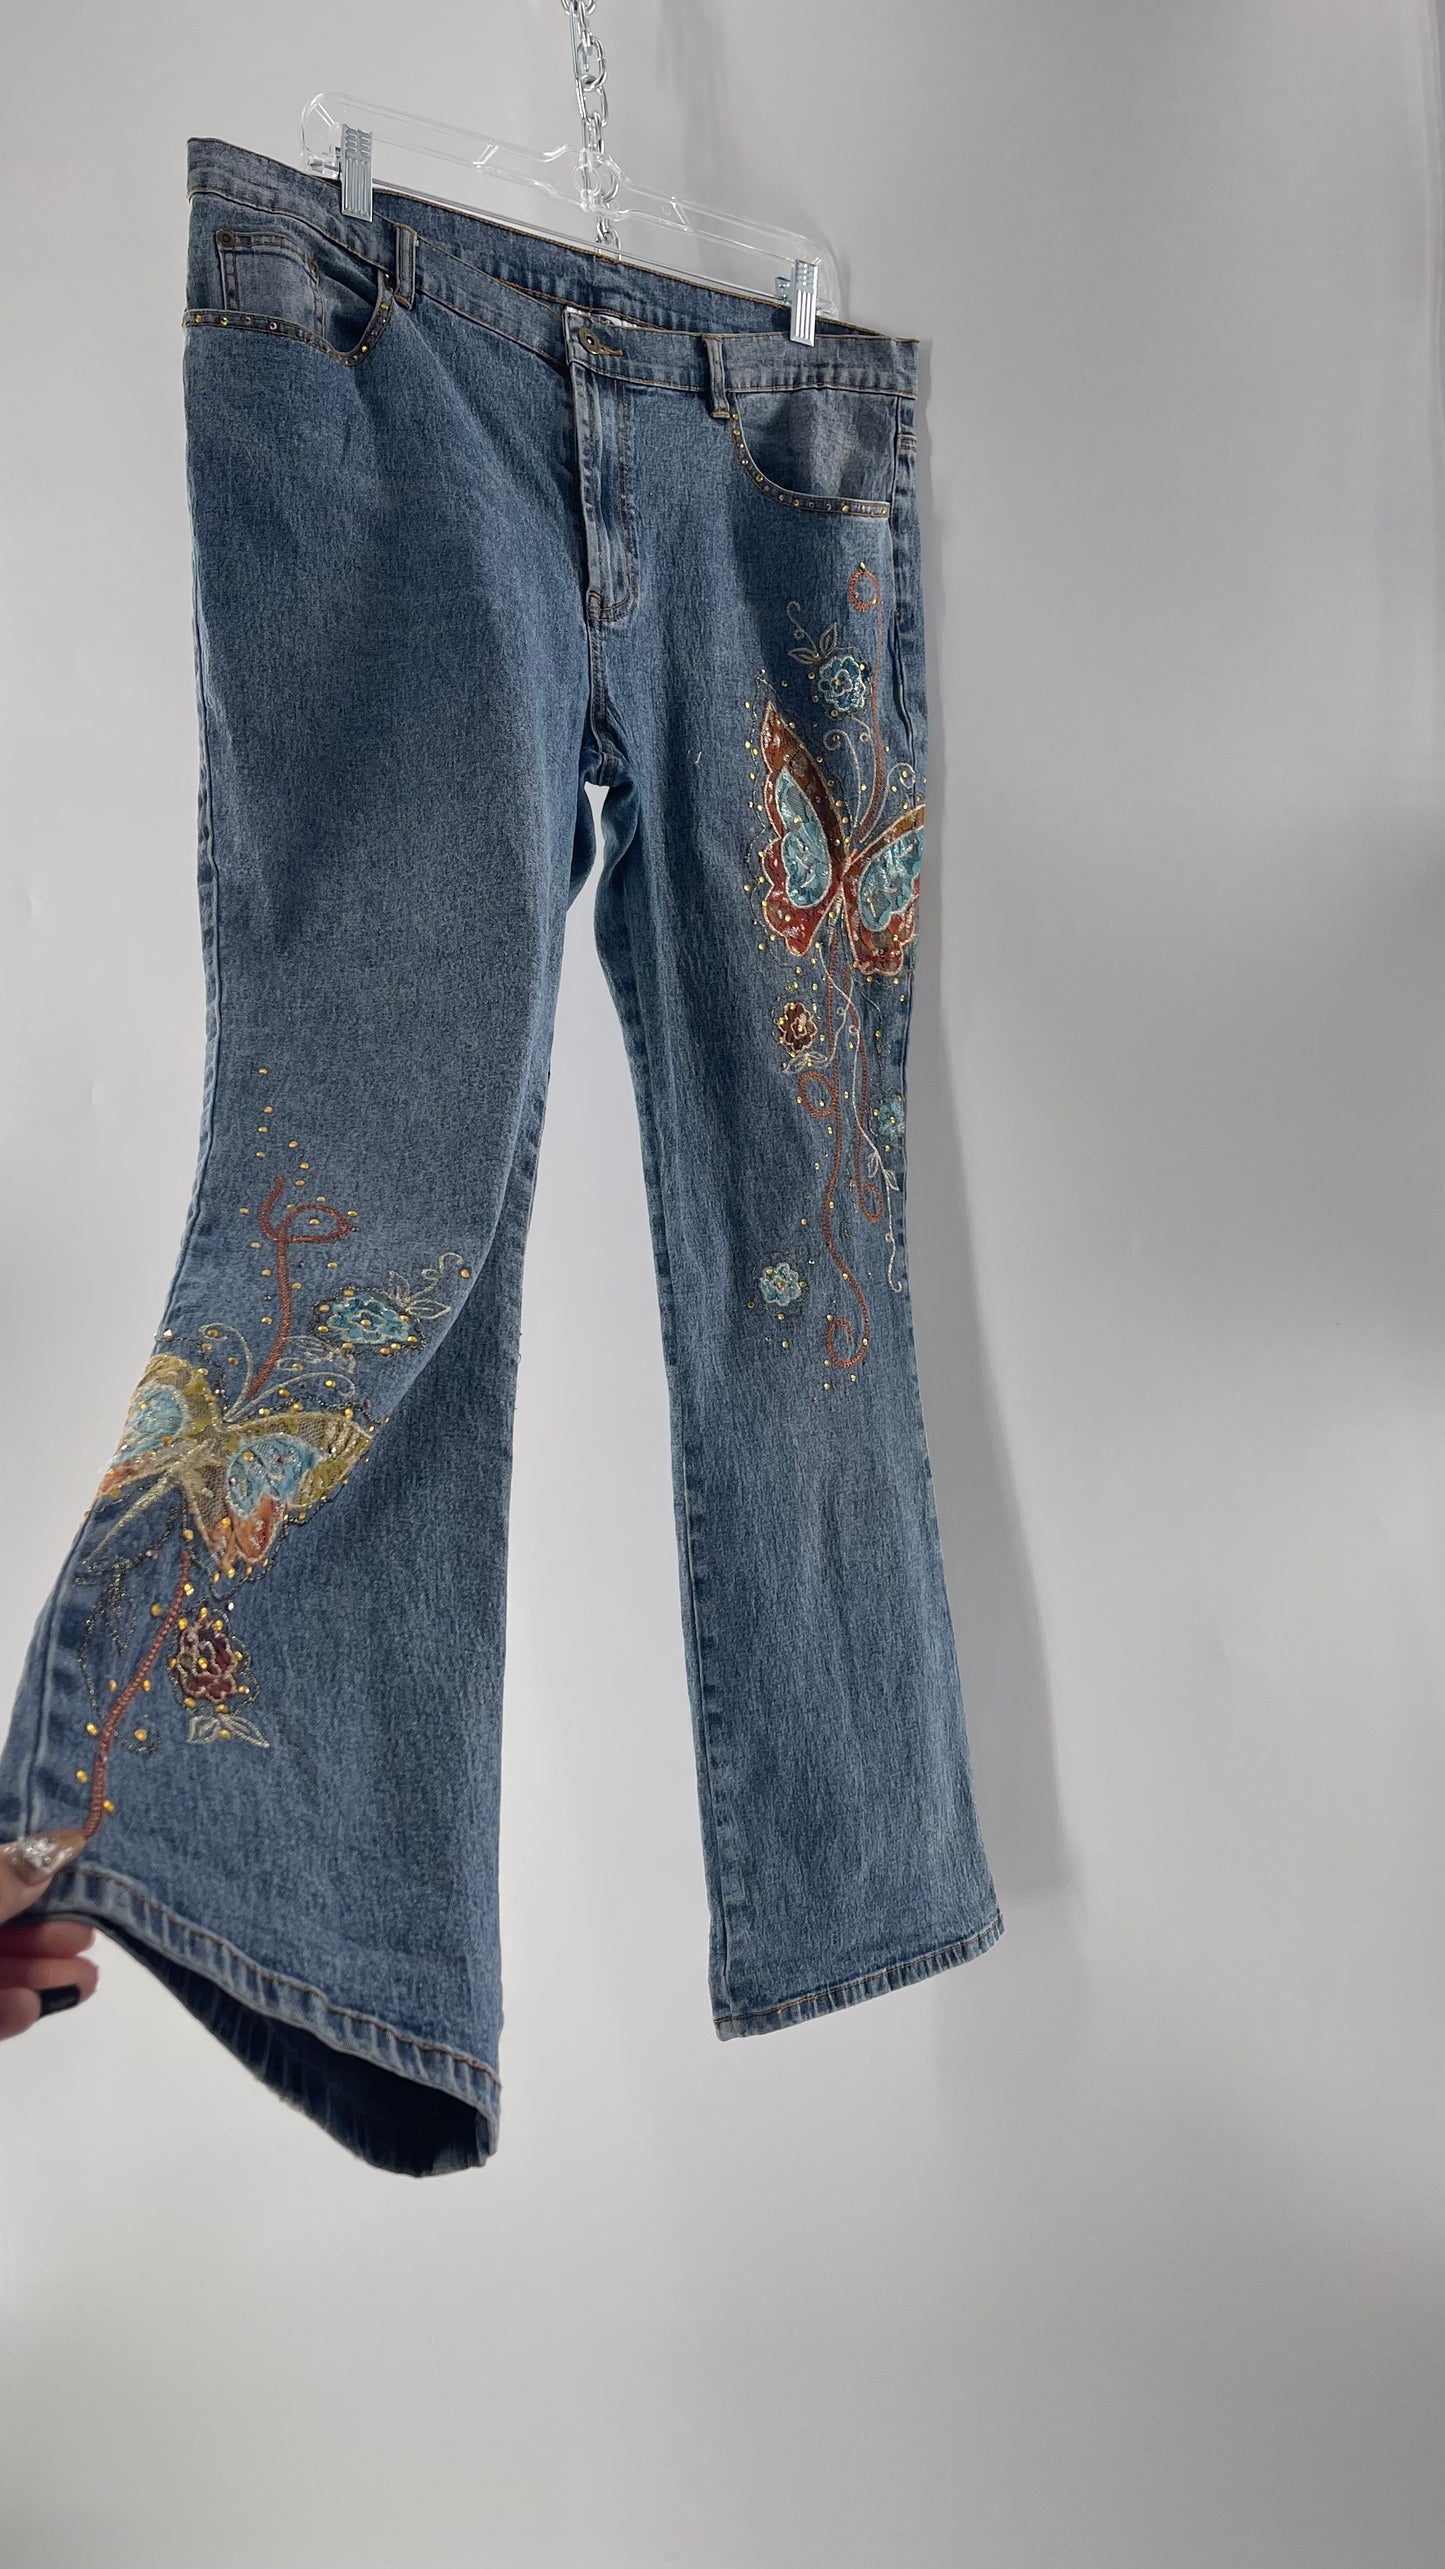 Vintage Diane Gilman Kickflare Denim with Embroidered Butterfly Motifs (14)